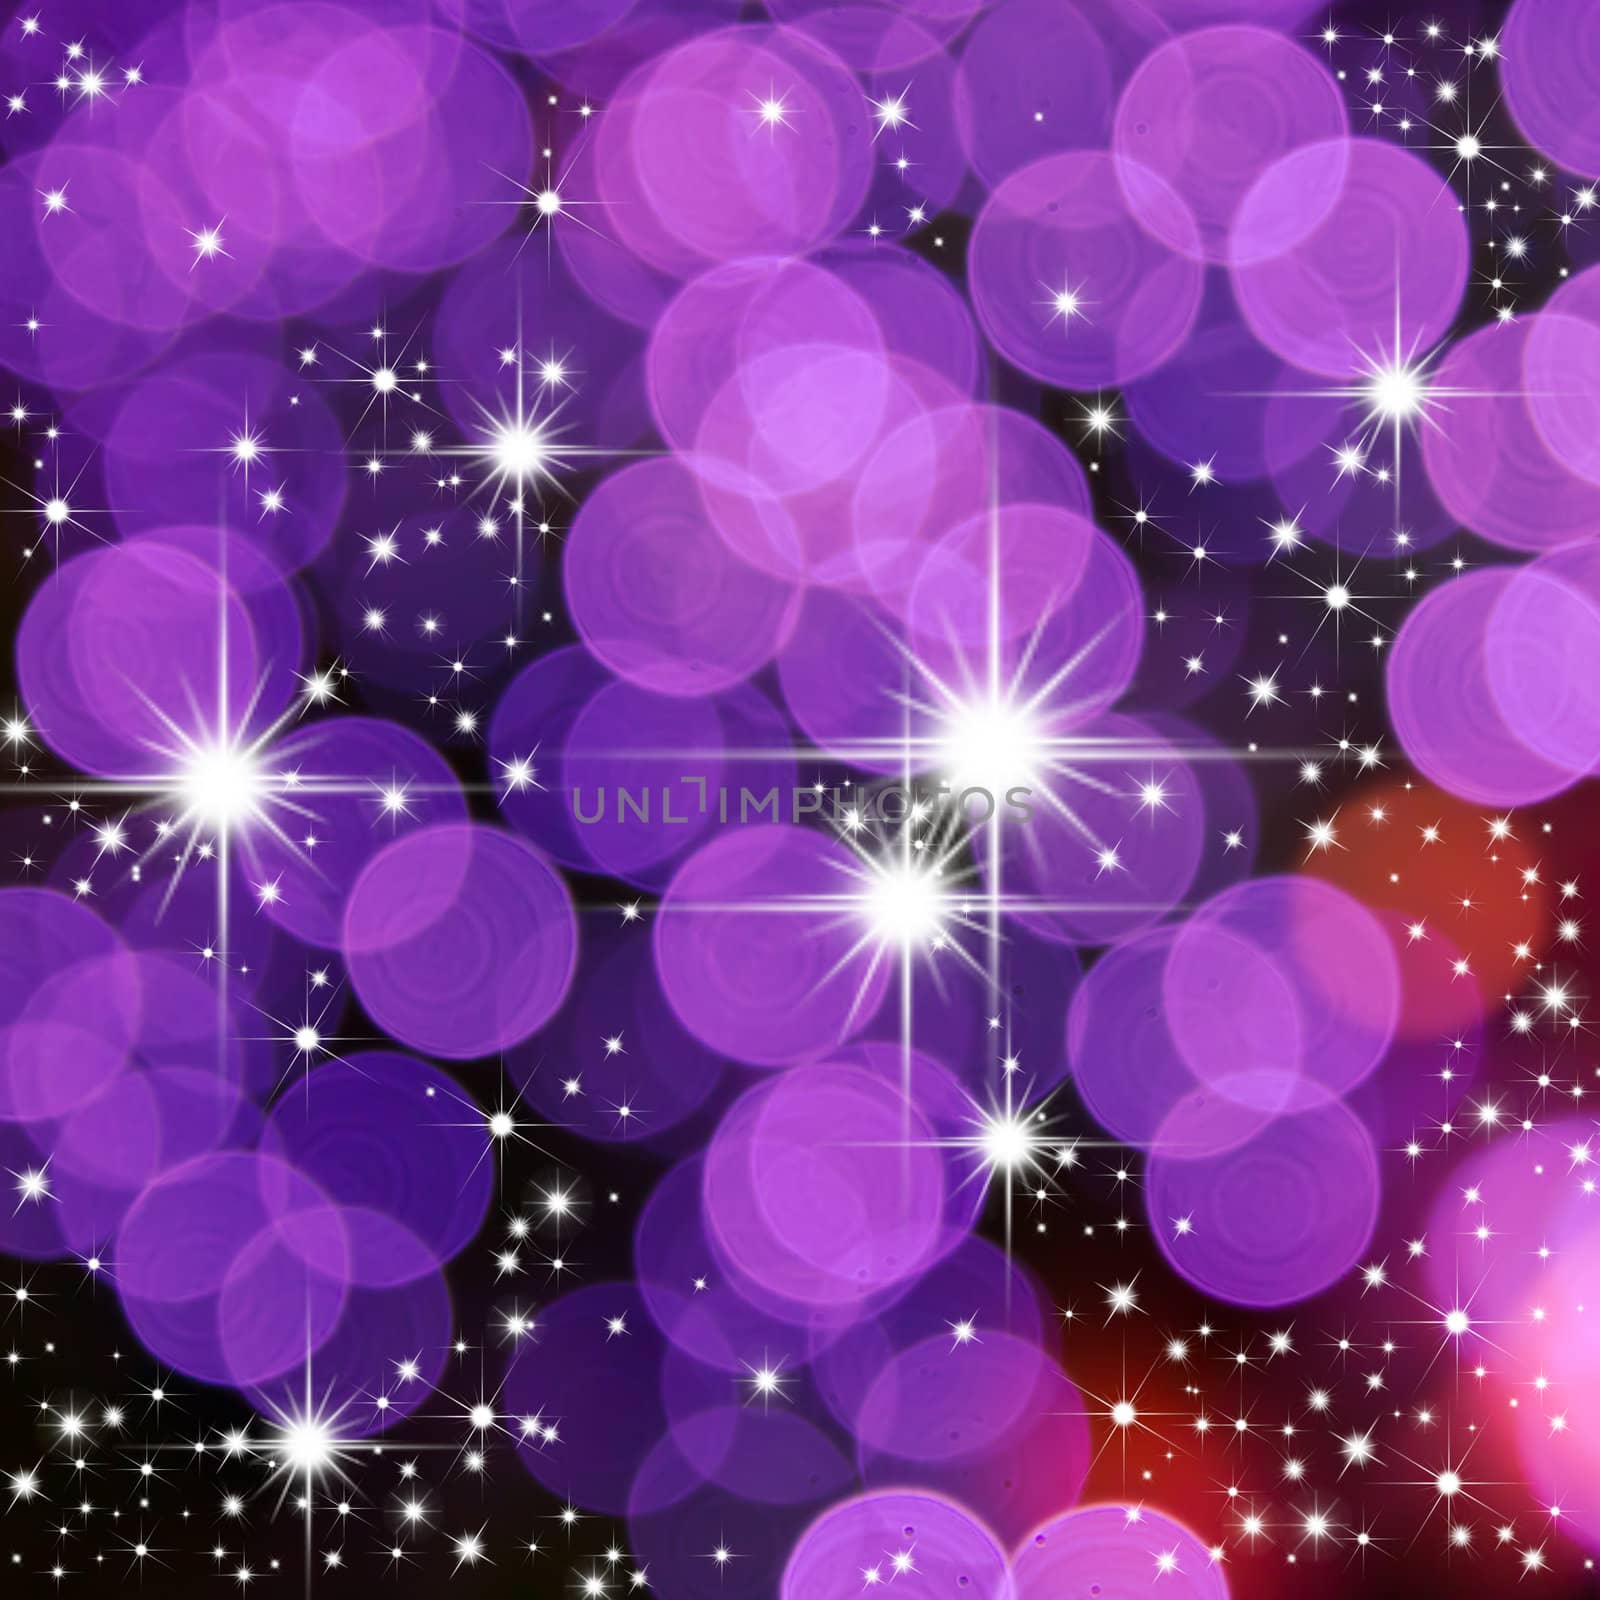 bright star and purple round light for web background